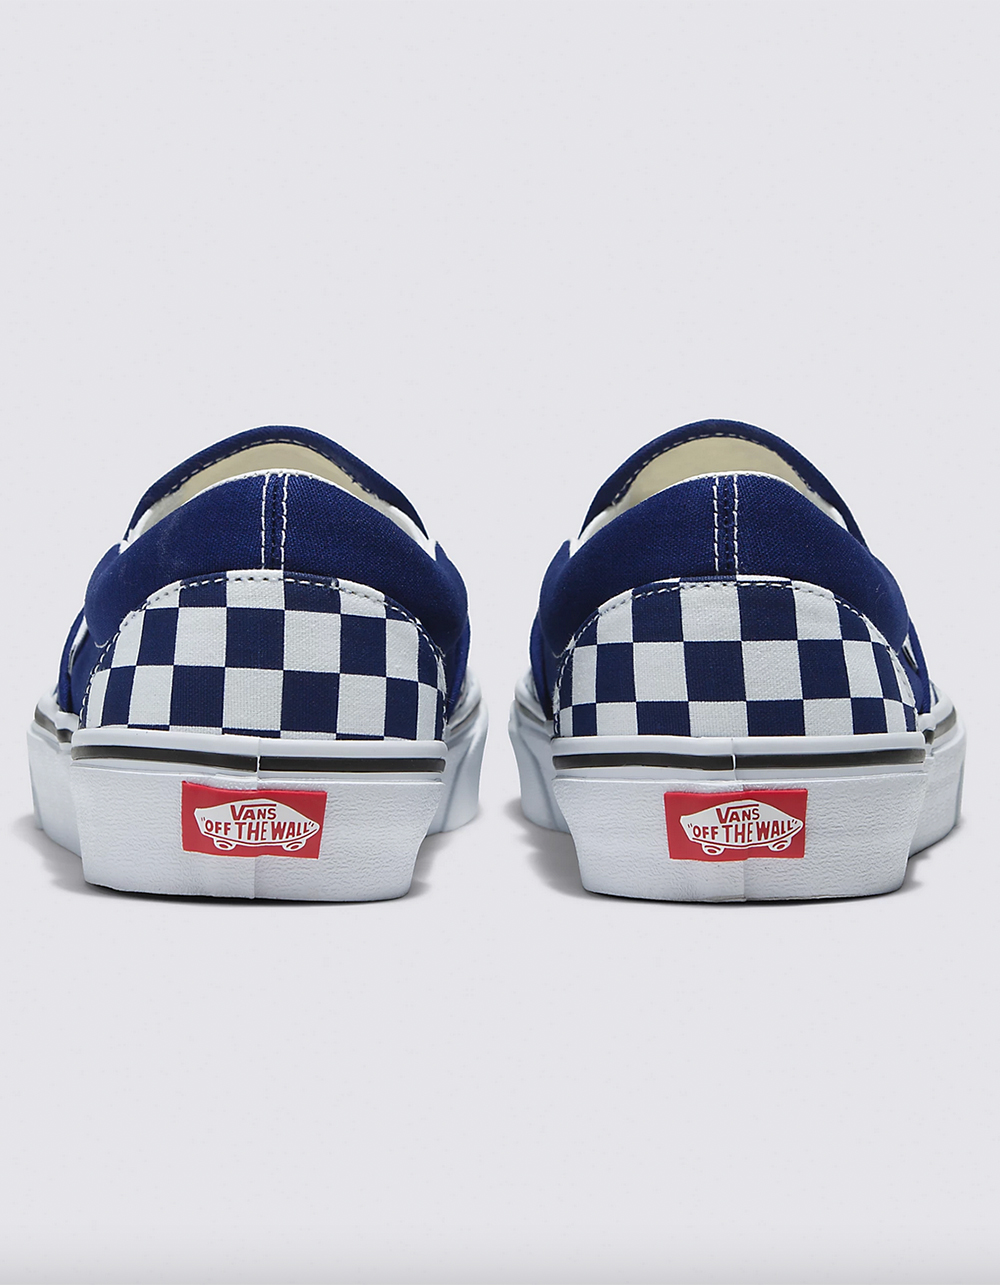 VANS Checkerboard Classic Slip-On Shoes - ROYAL | Tillys